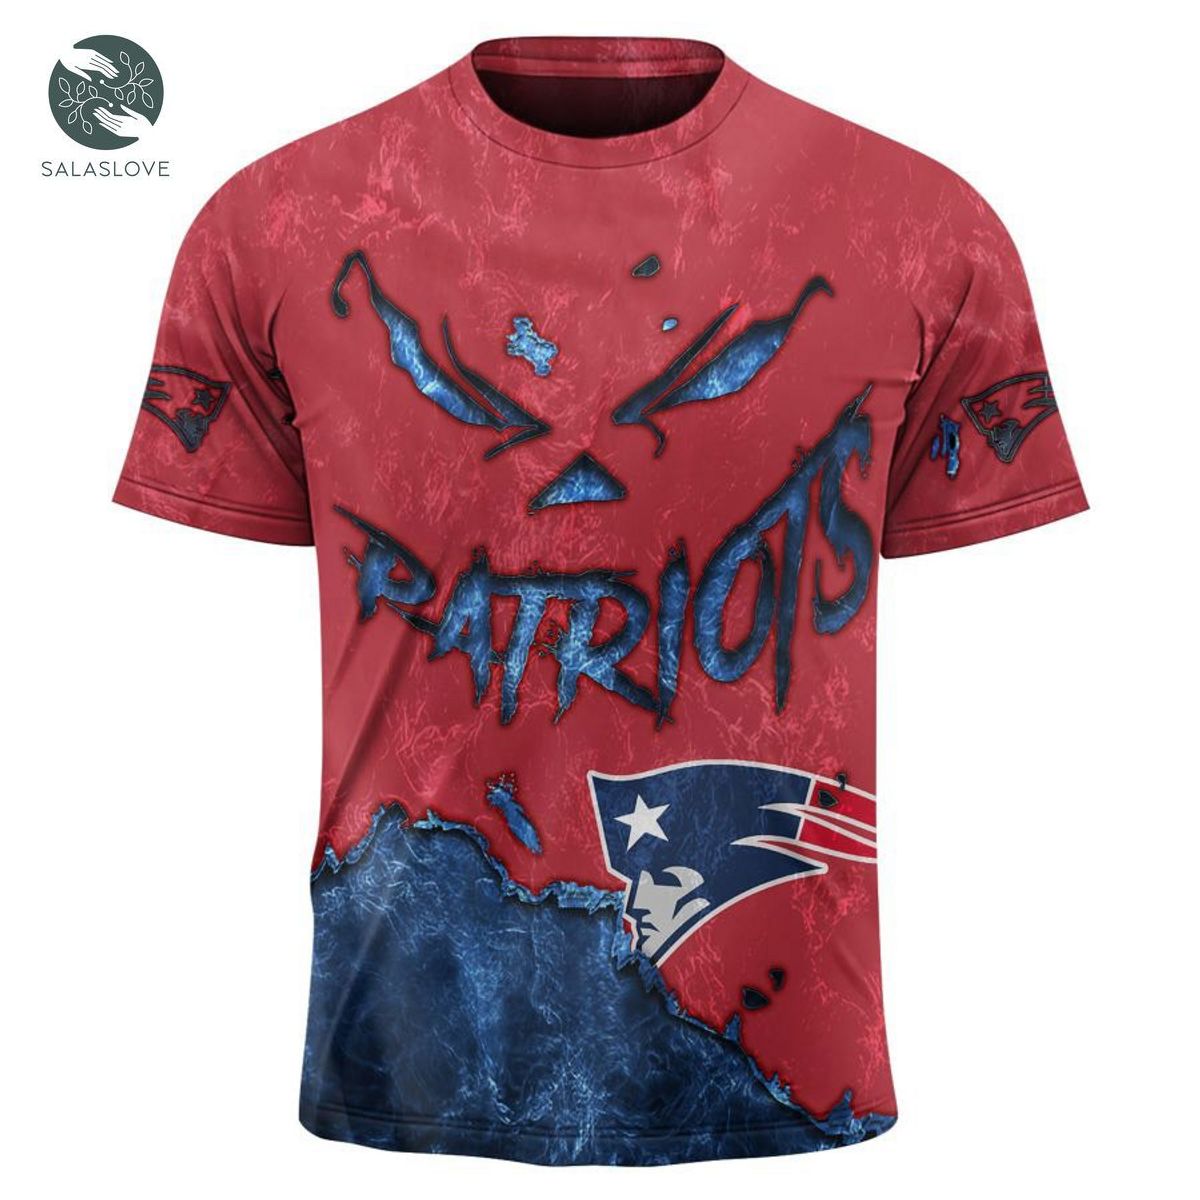 New England Patriots T-shirt 3D devil eyes gift for fans